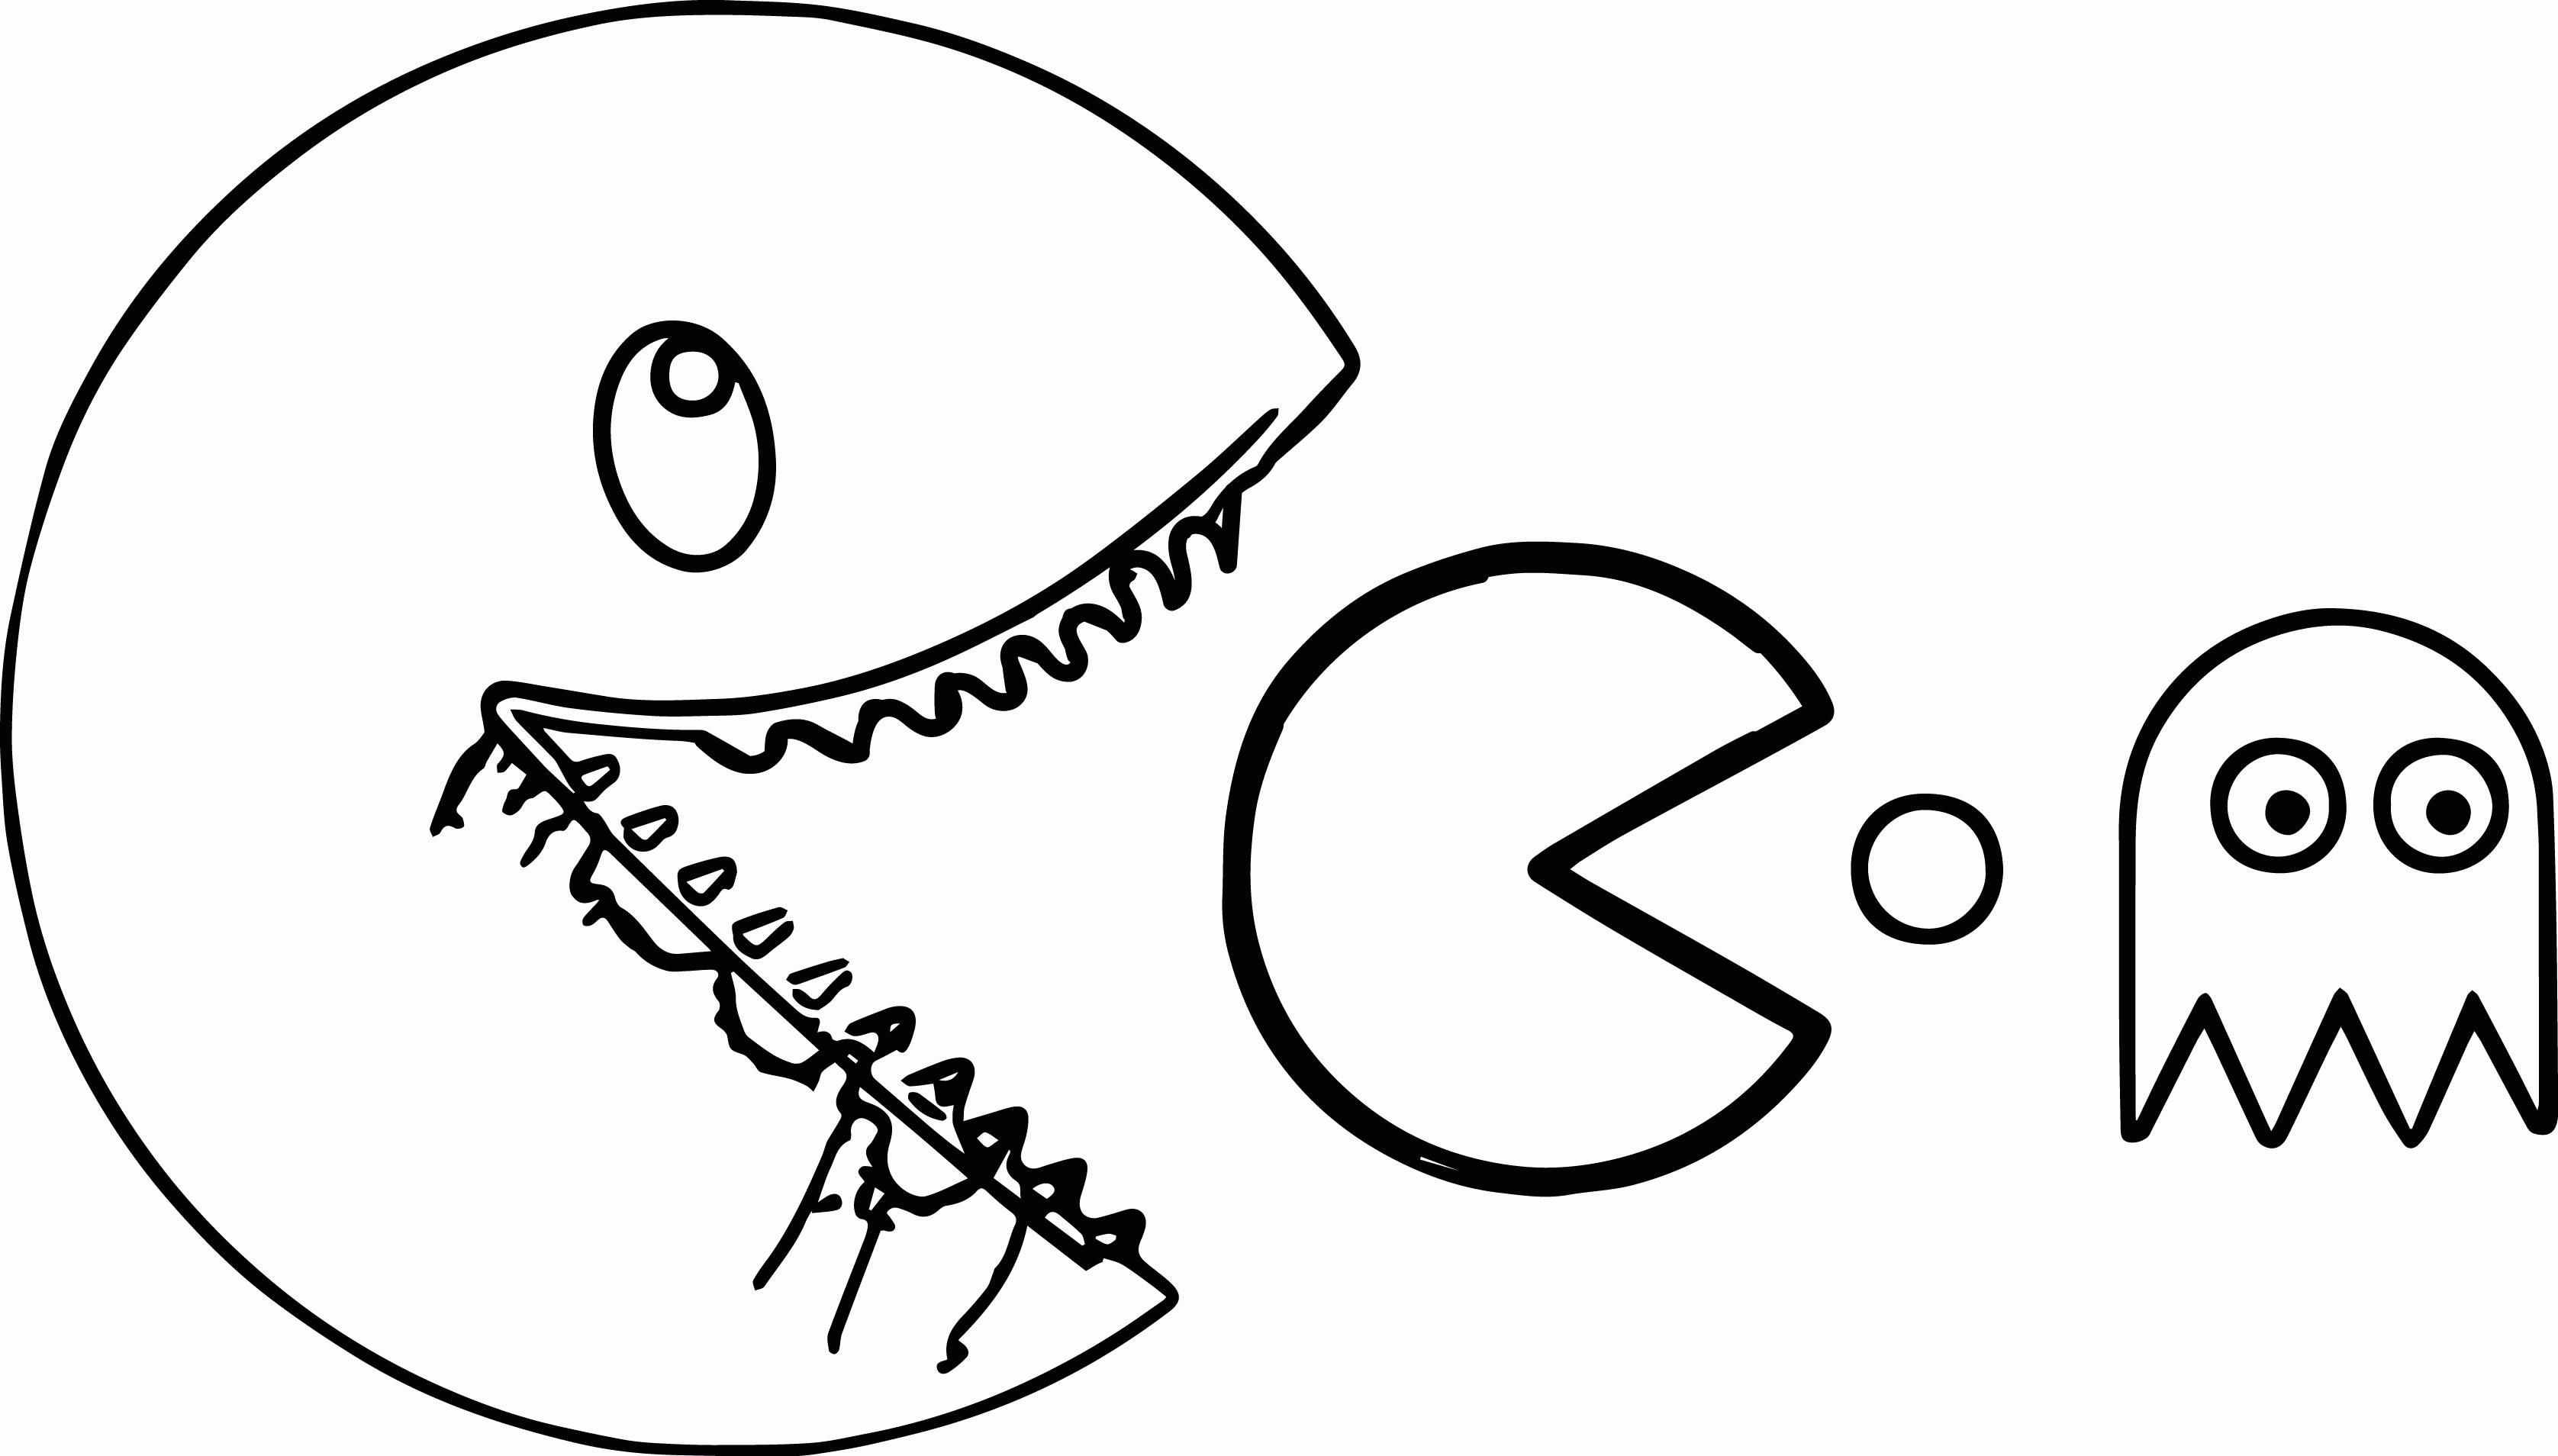 359 Cartoon Pacman Coloring Pages with Animal character